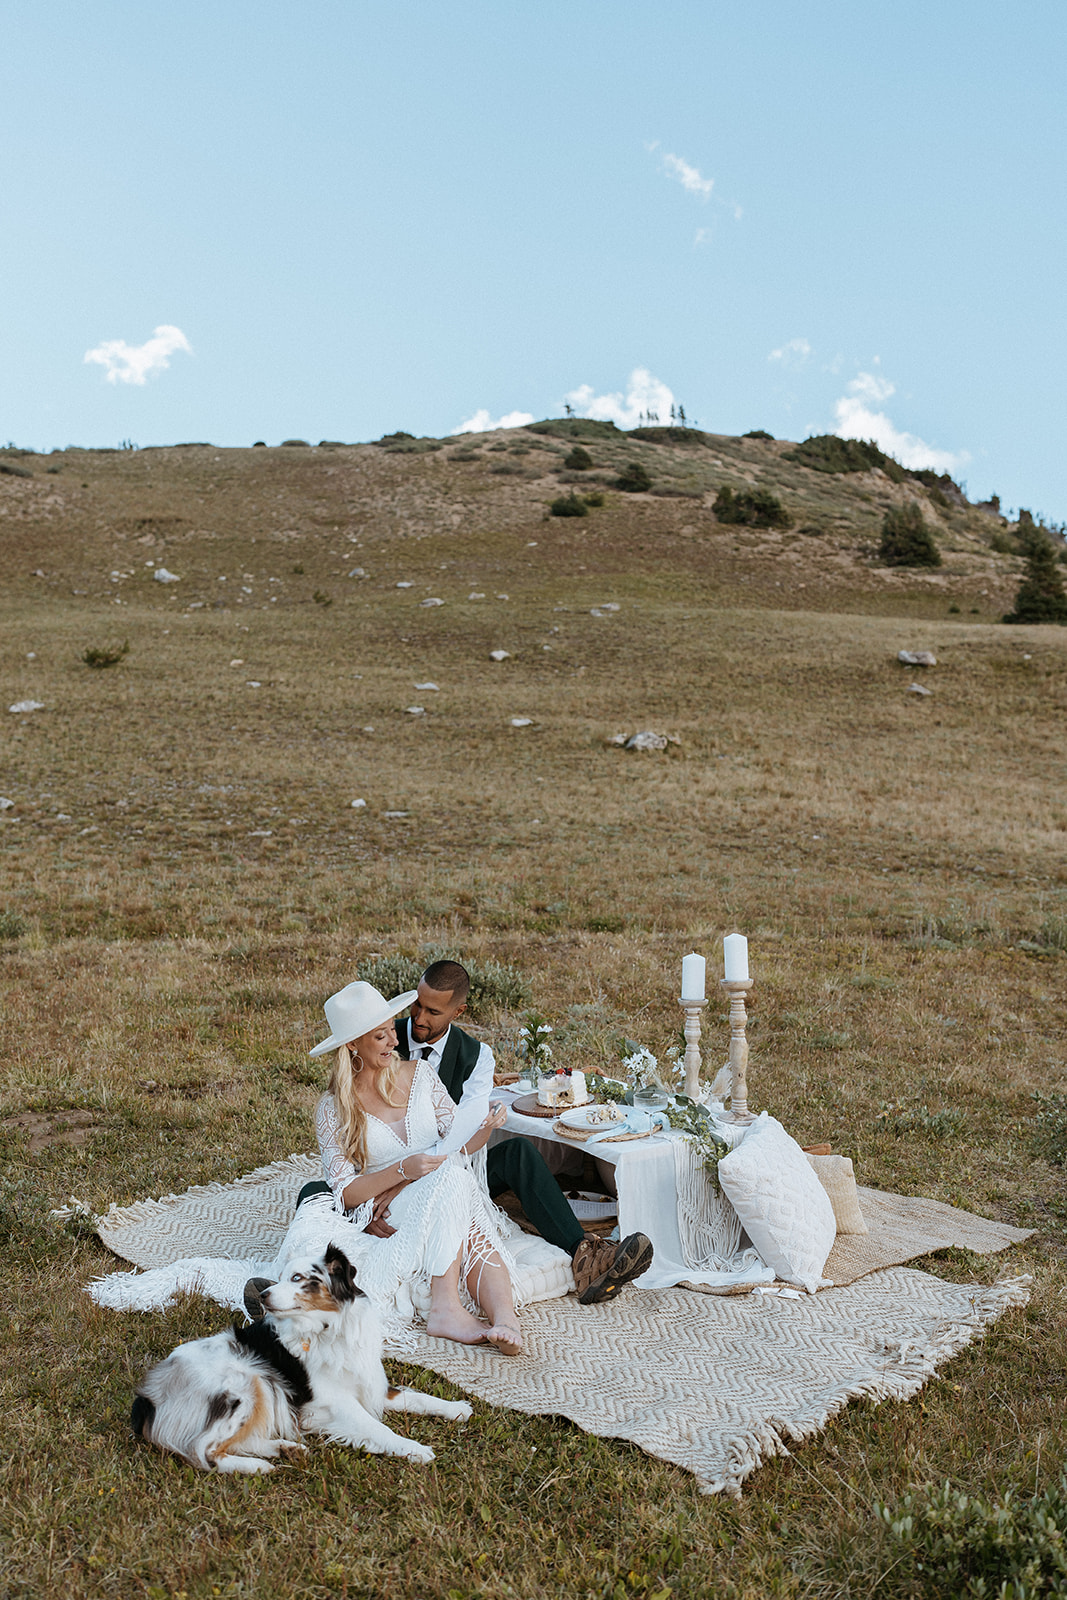 Newlyweds sit on a picnic blanket set up with cake and candles alongside their dog after their Hoosier Pass Elopement